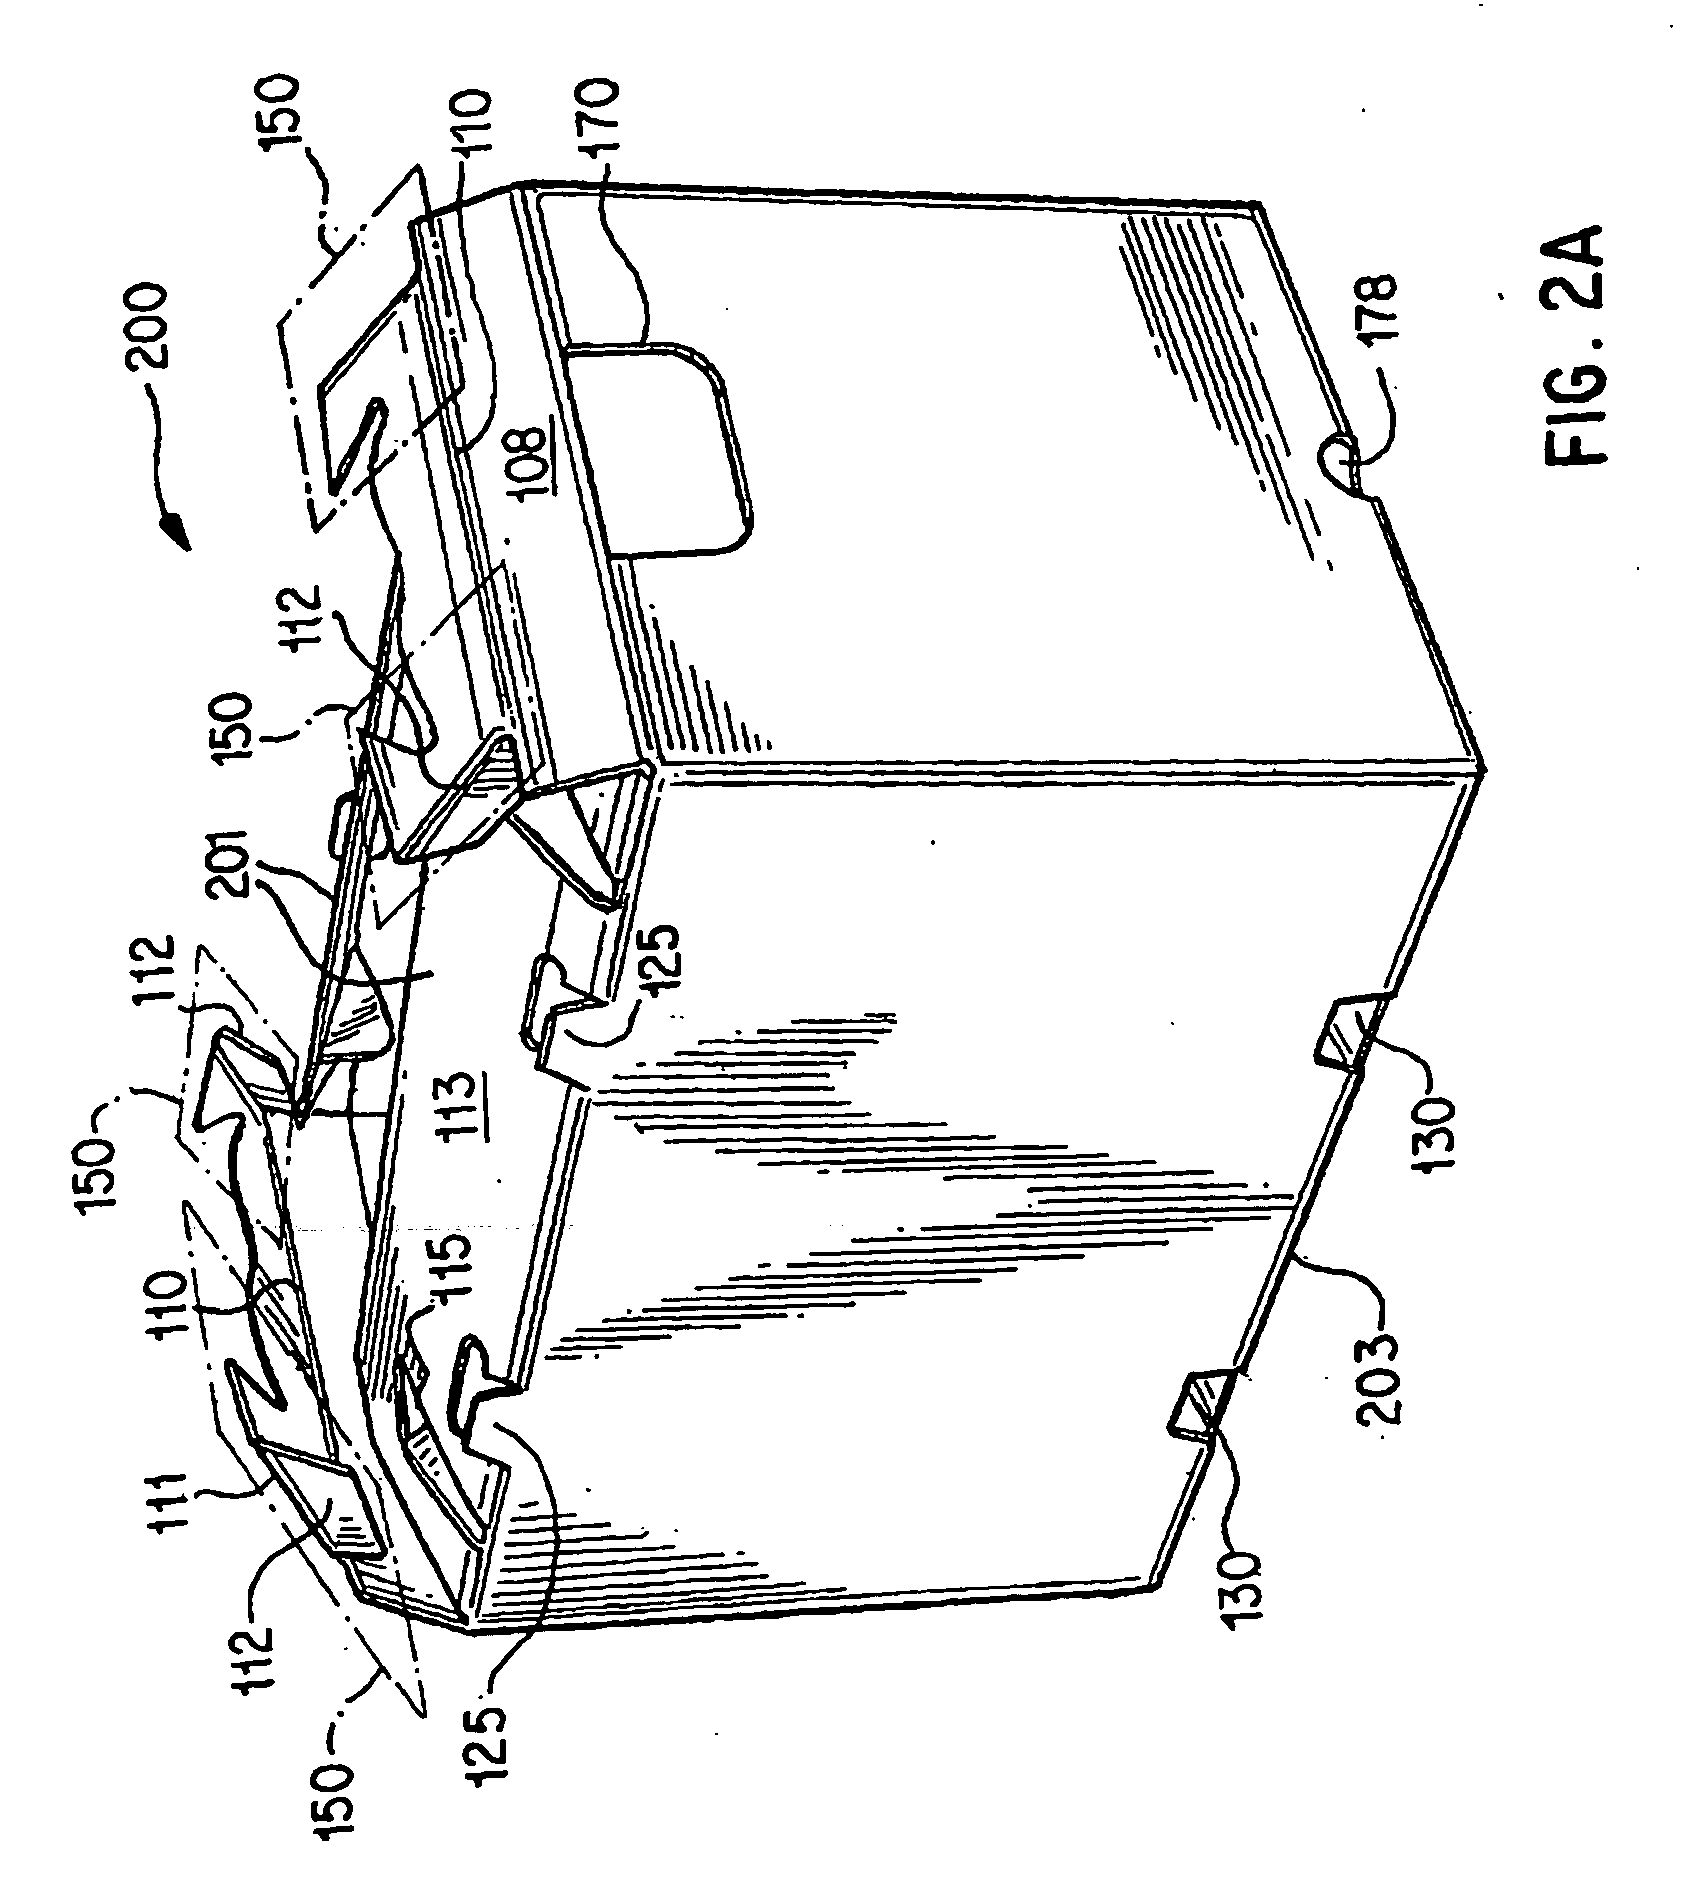 Paperboard container with locking flaps